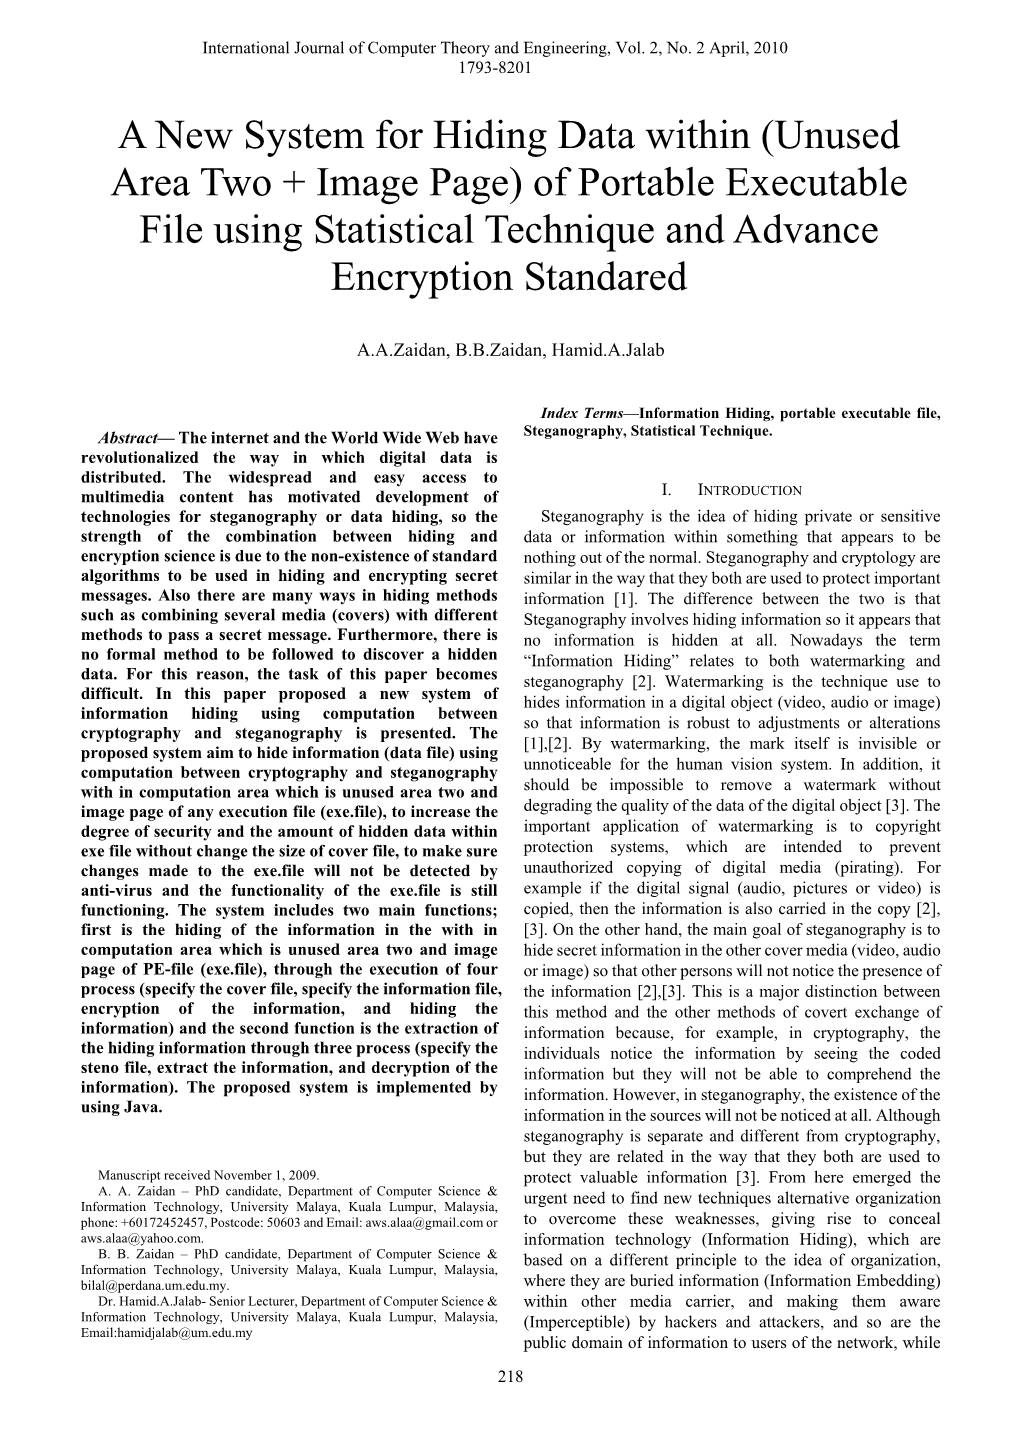 Of Portable Executable File Using Statistical Technique and Advance Encryption Standared